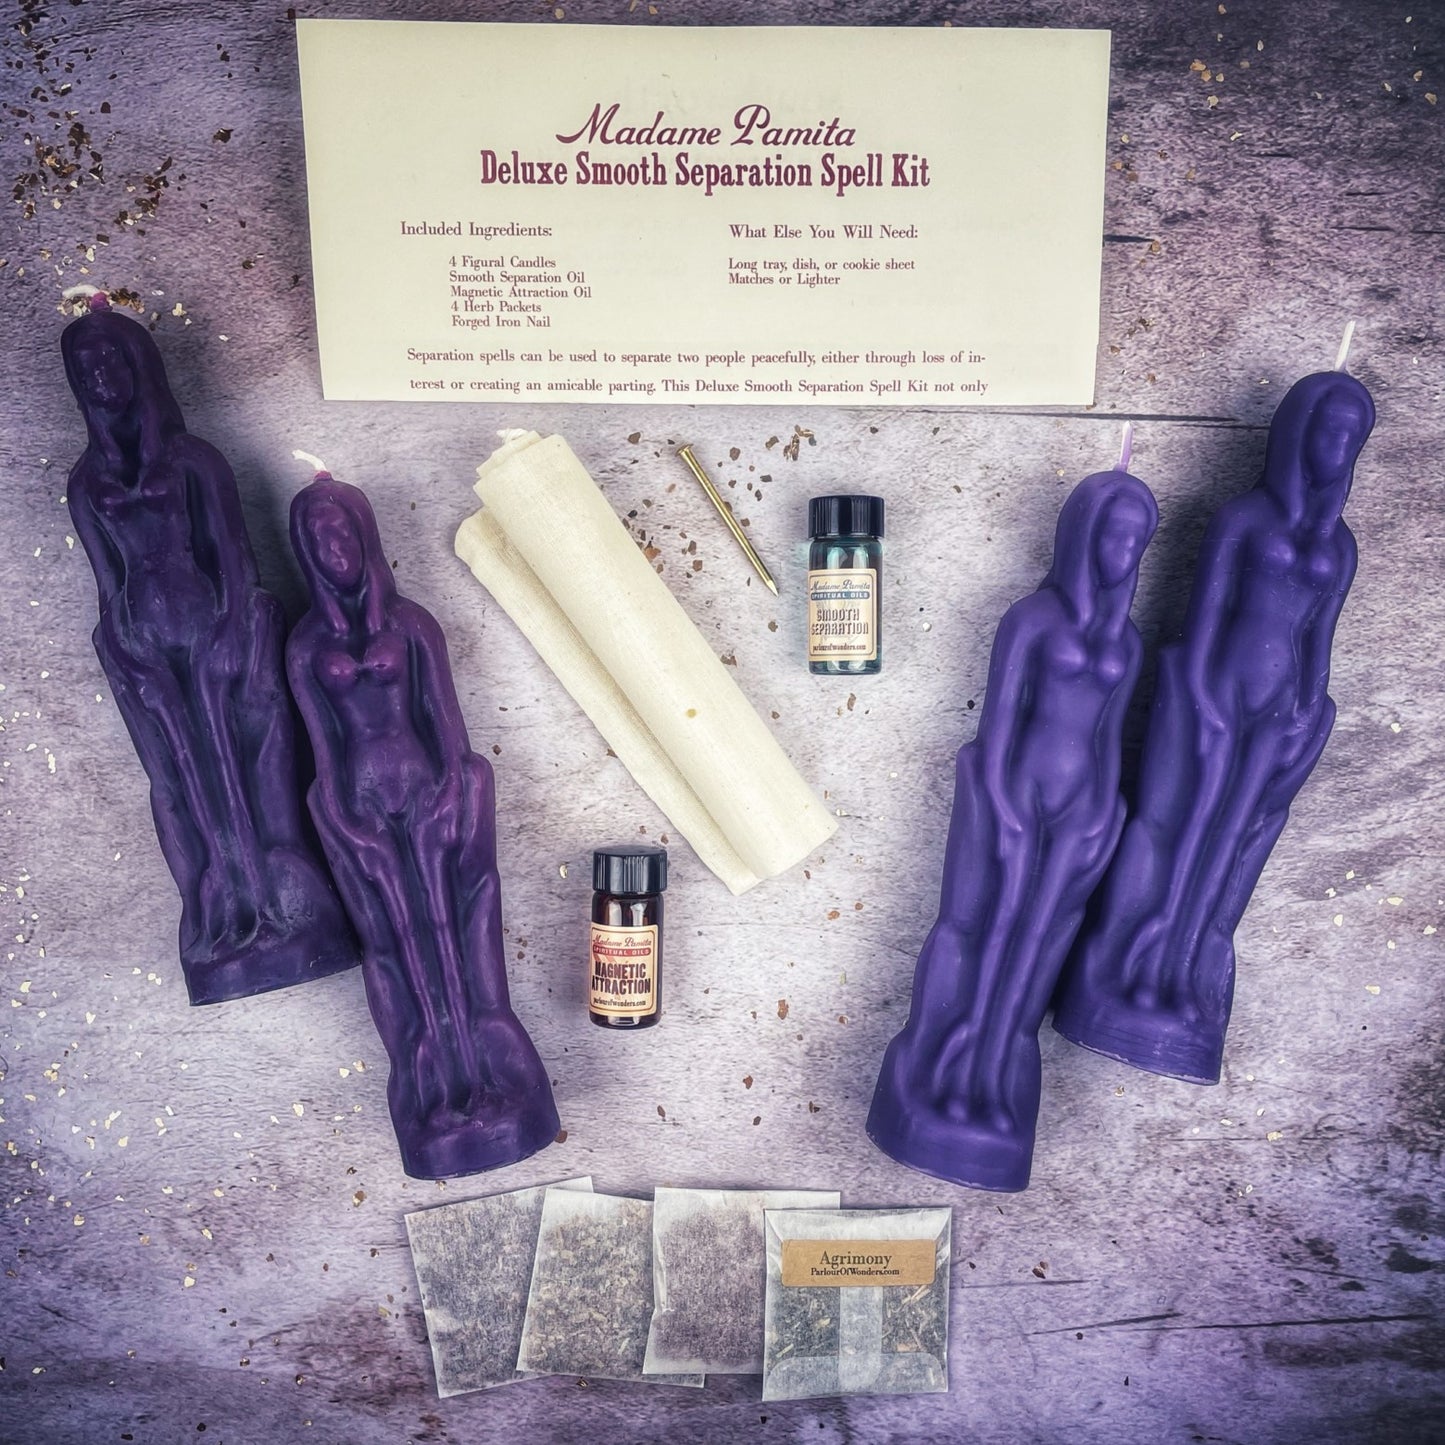 Deluxe Smooth Separation Candle Spell Kit - Female/Female